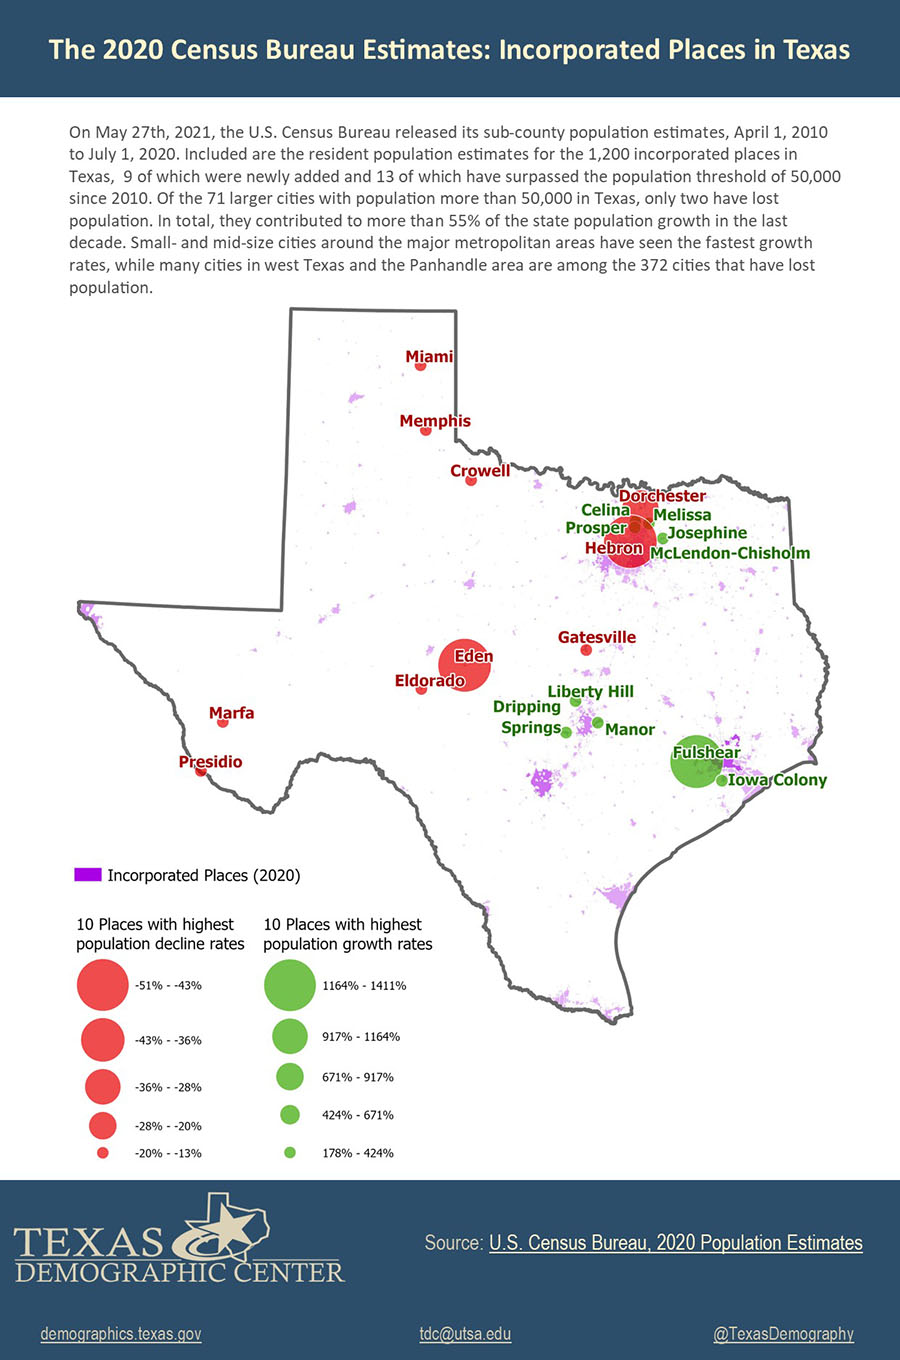 One Page Inforgraphic the 2020 Census Bureau Estimates: Incorporated Places in Texas